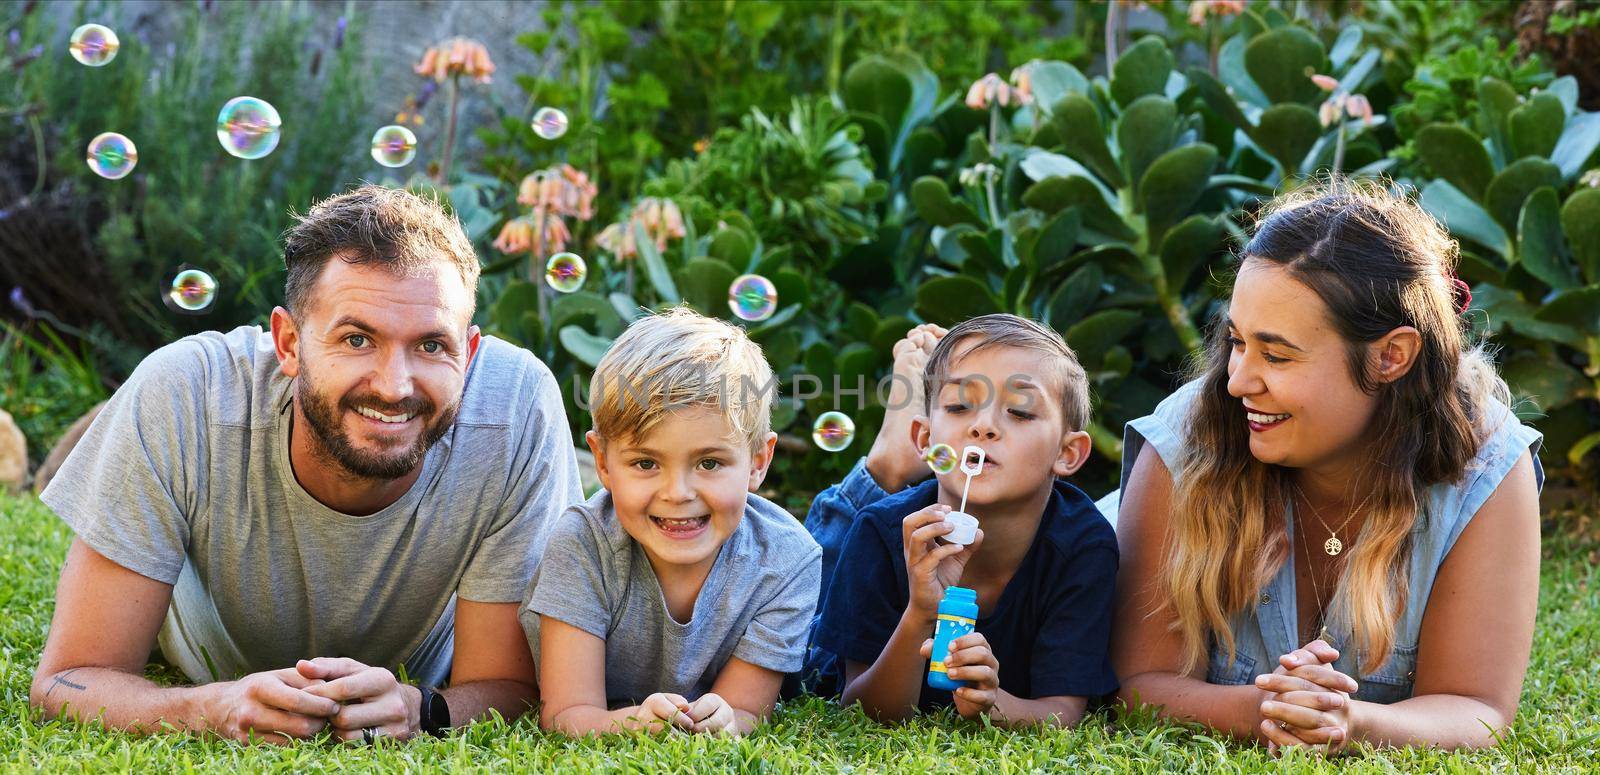 Smiles of children, gift of parenthood. Portrait of a beautiful family laying on the grass and playing with bubbles in a backyard. by YuriArcurs